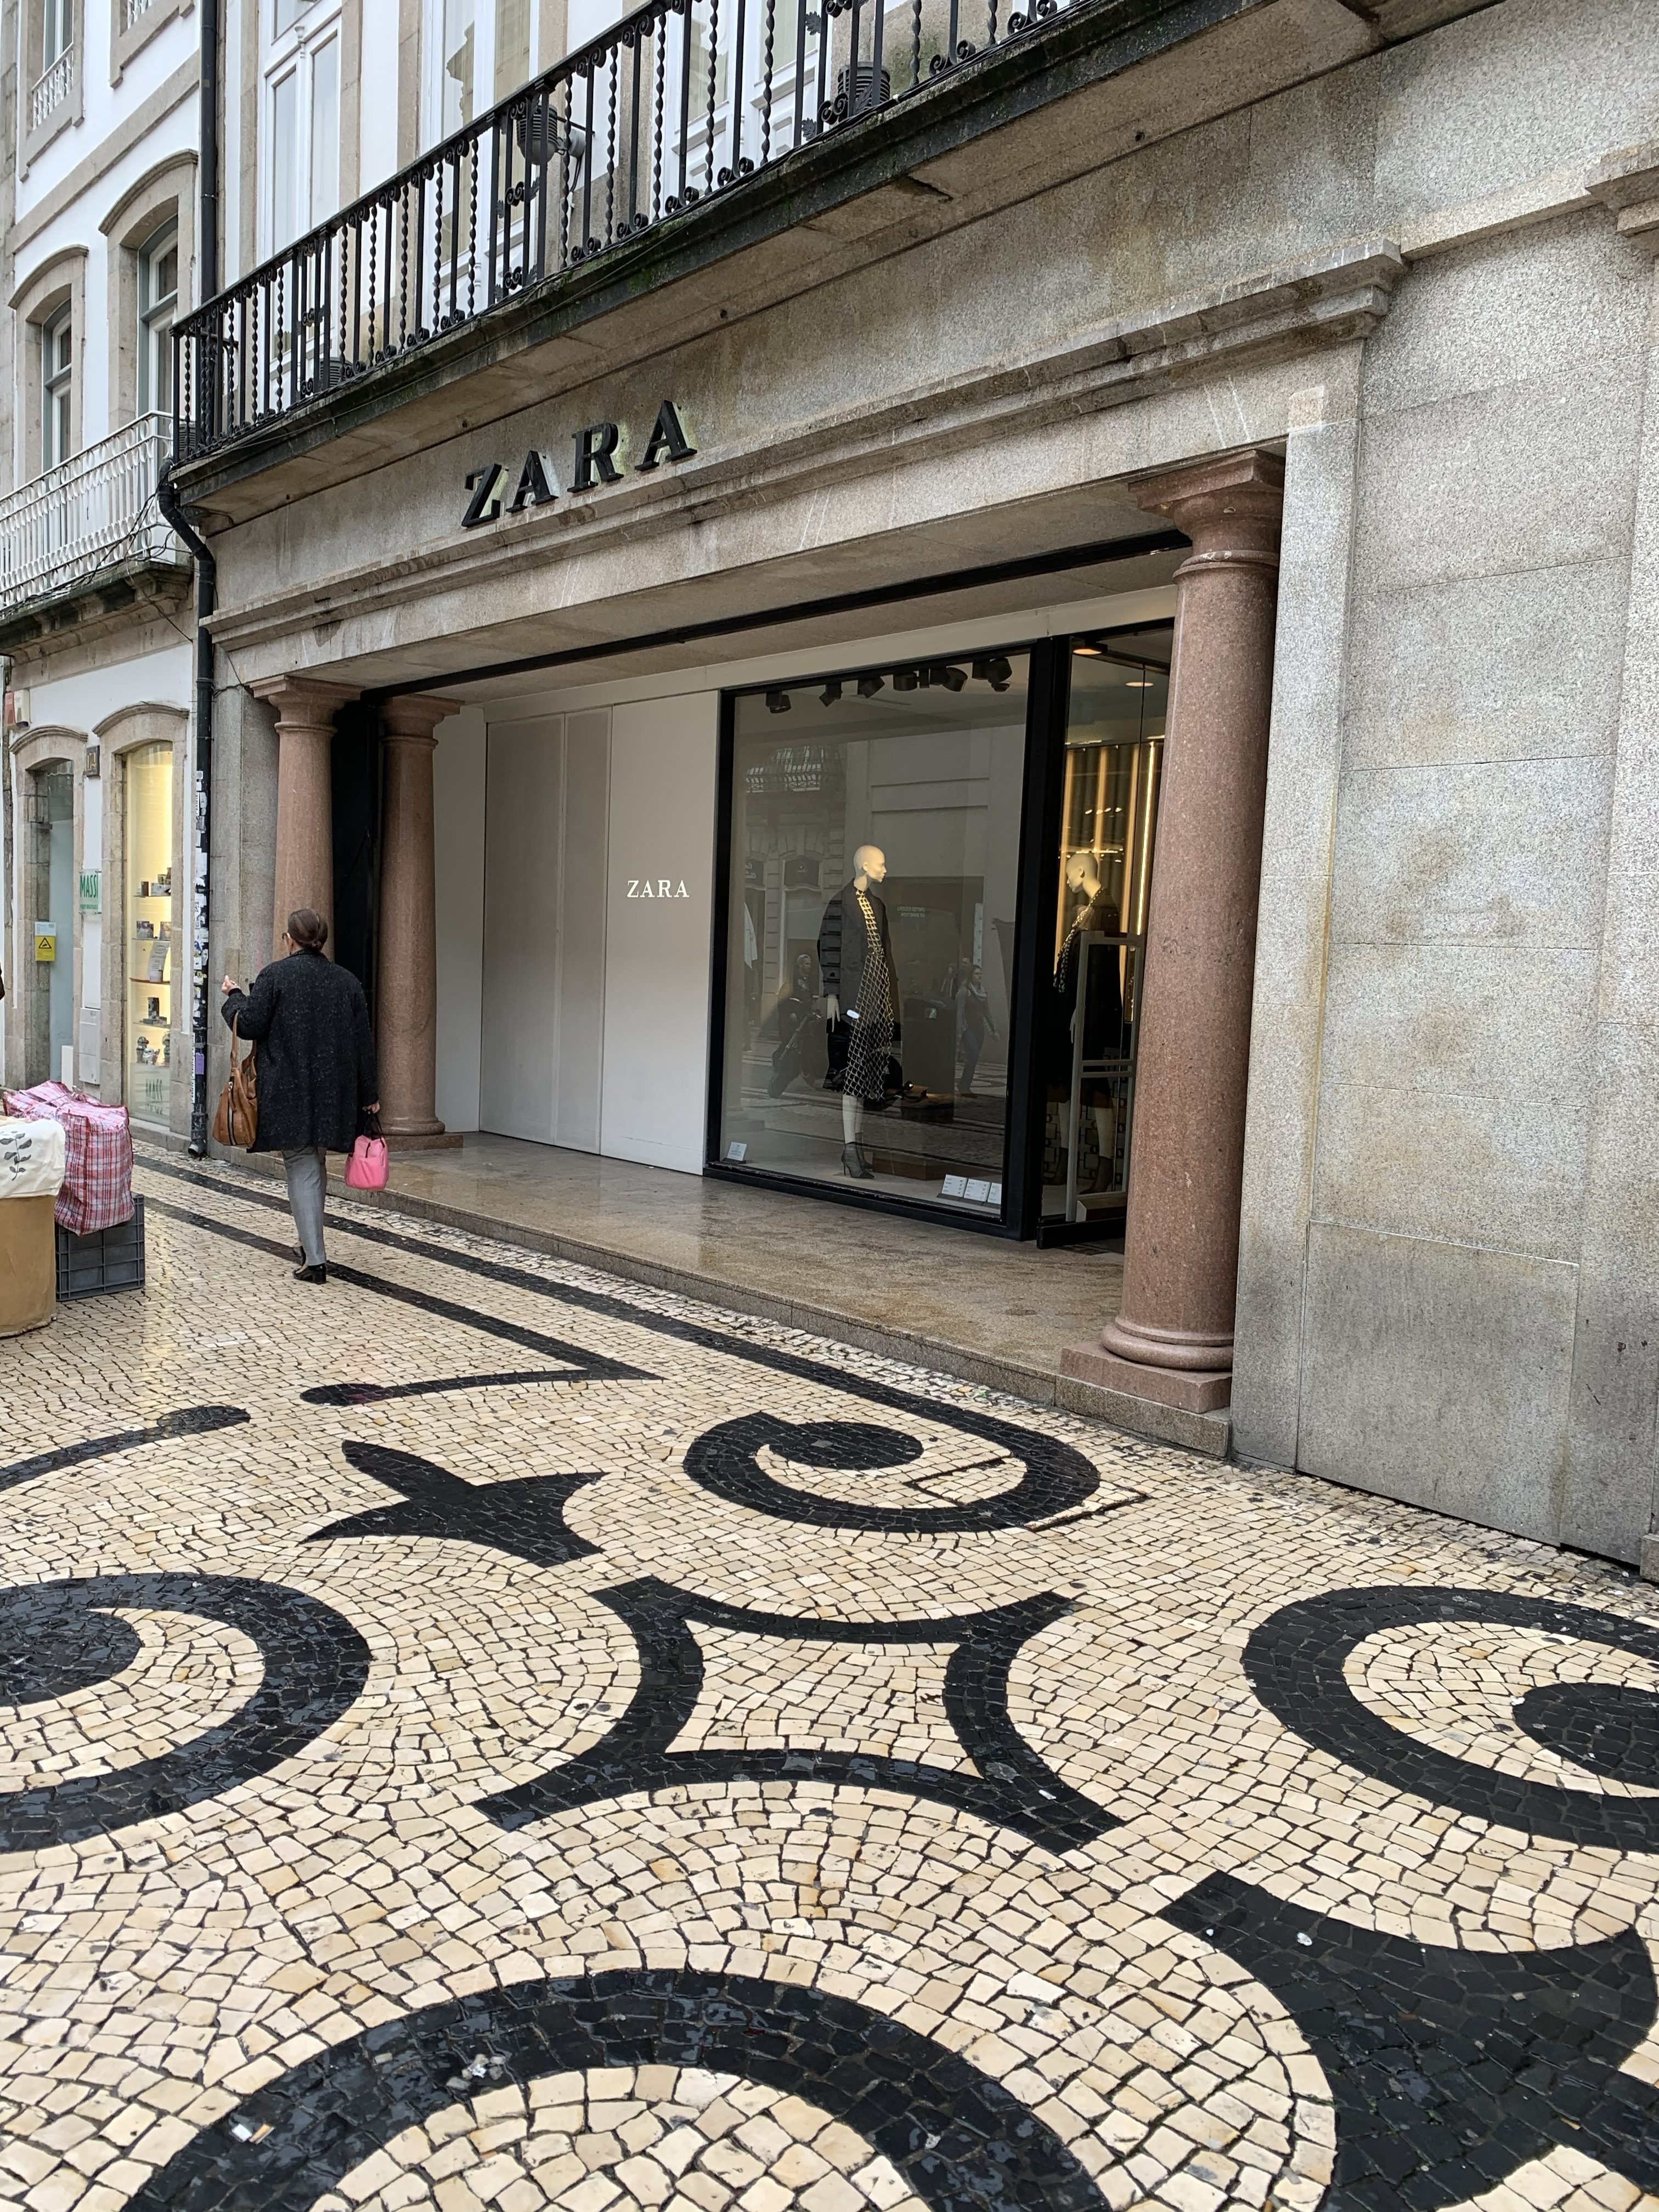 A must stop and shop at the Zara in Porto - Santo IIdefonso on our European Vacation On The Douro River